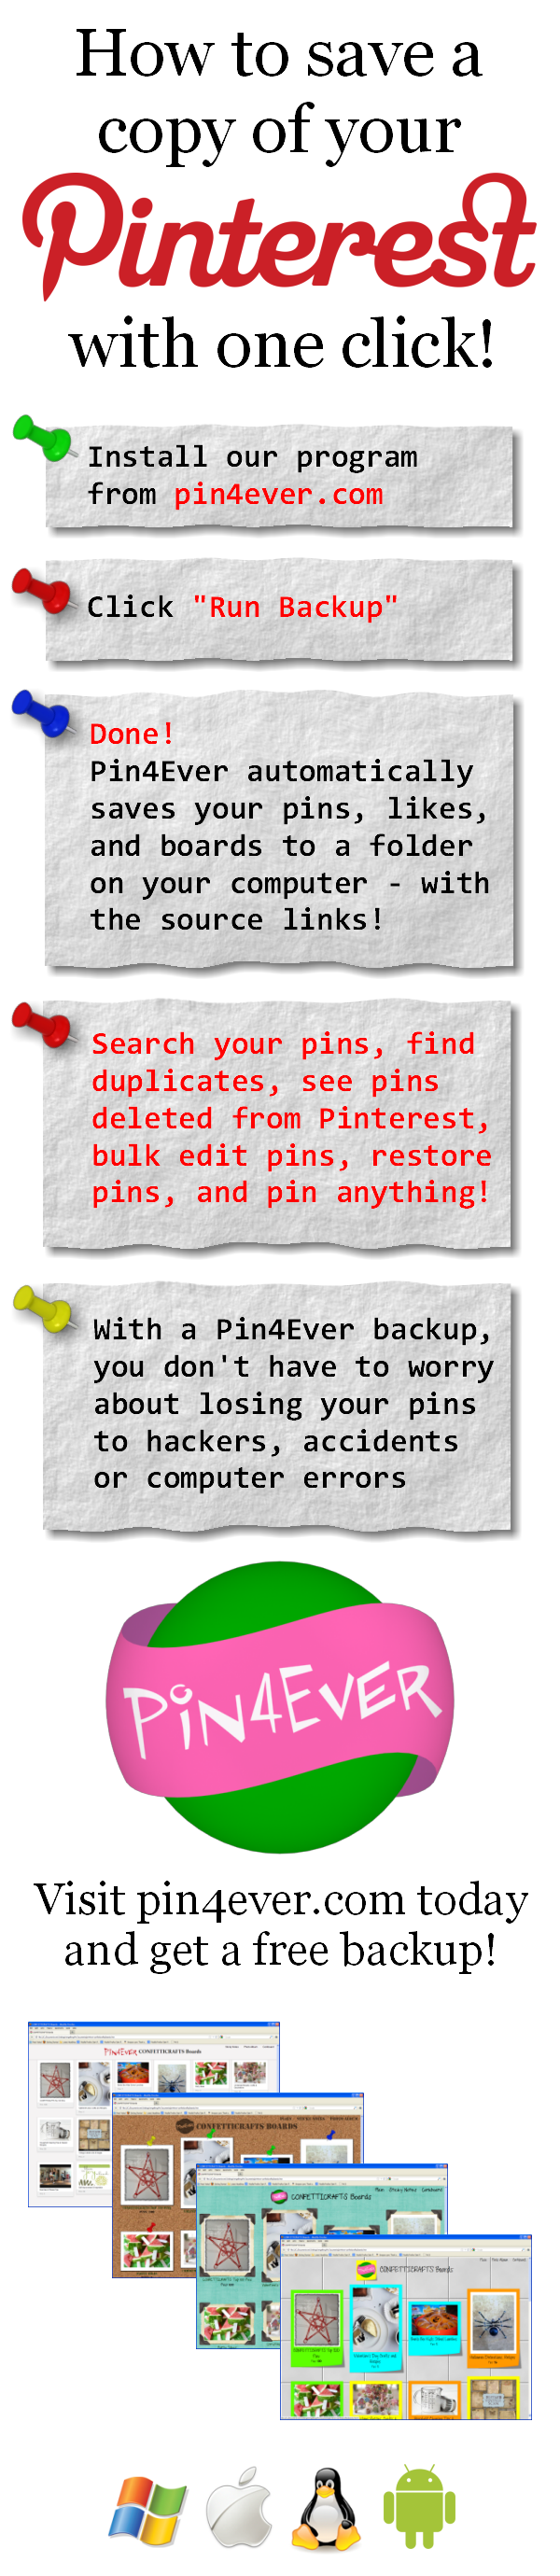 Are your pins protected? Pin4Ever has saved, edited or uploaded 474,429,885 pins since September 2012. Go to pin4ever.com and try it free!